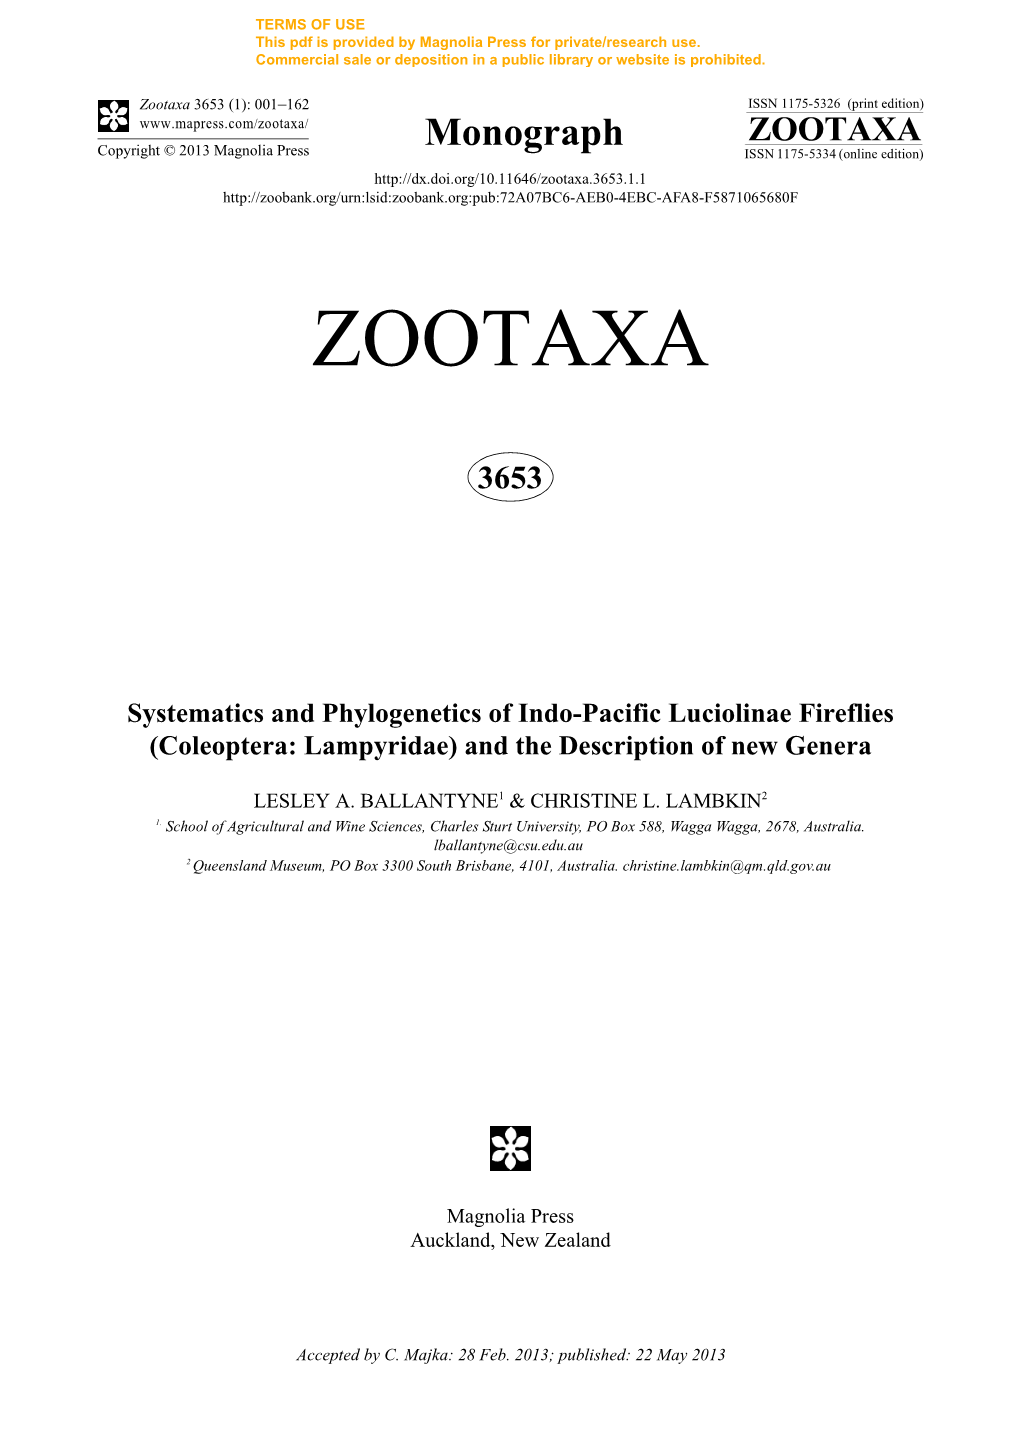 Coleoptera: Lampyridae) and the Description of New Genera